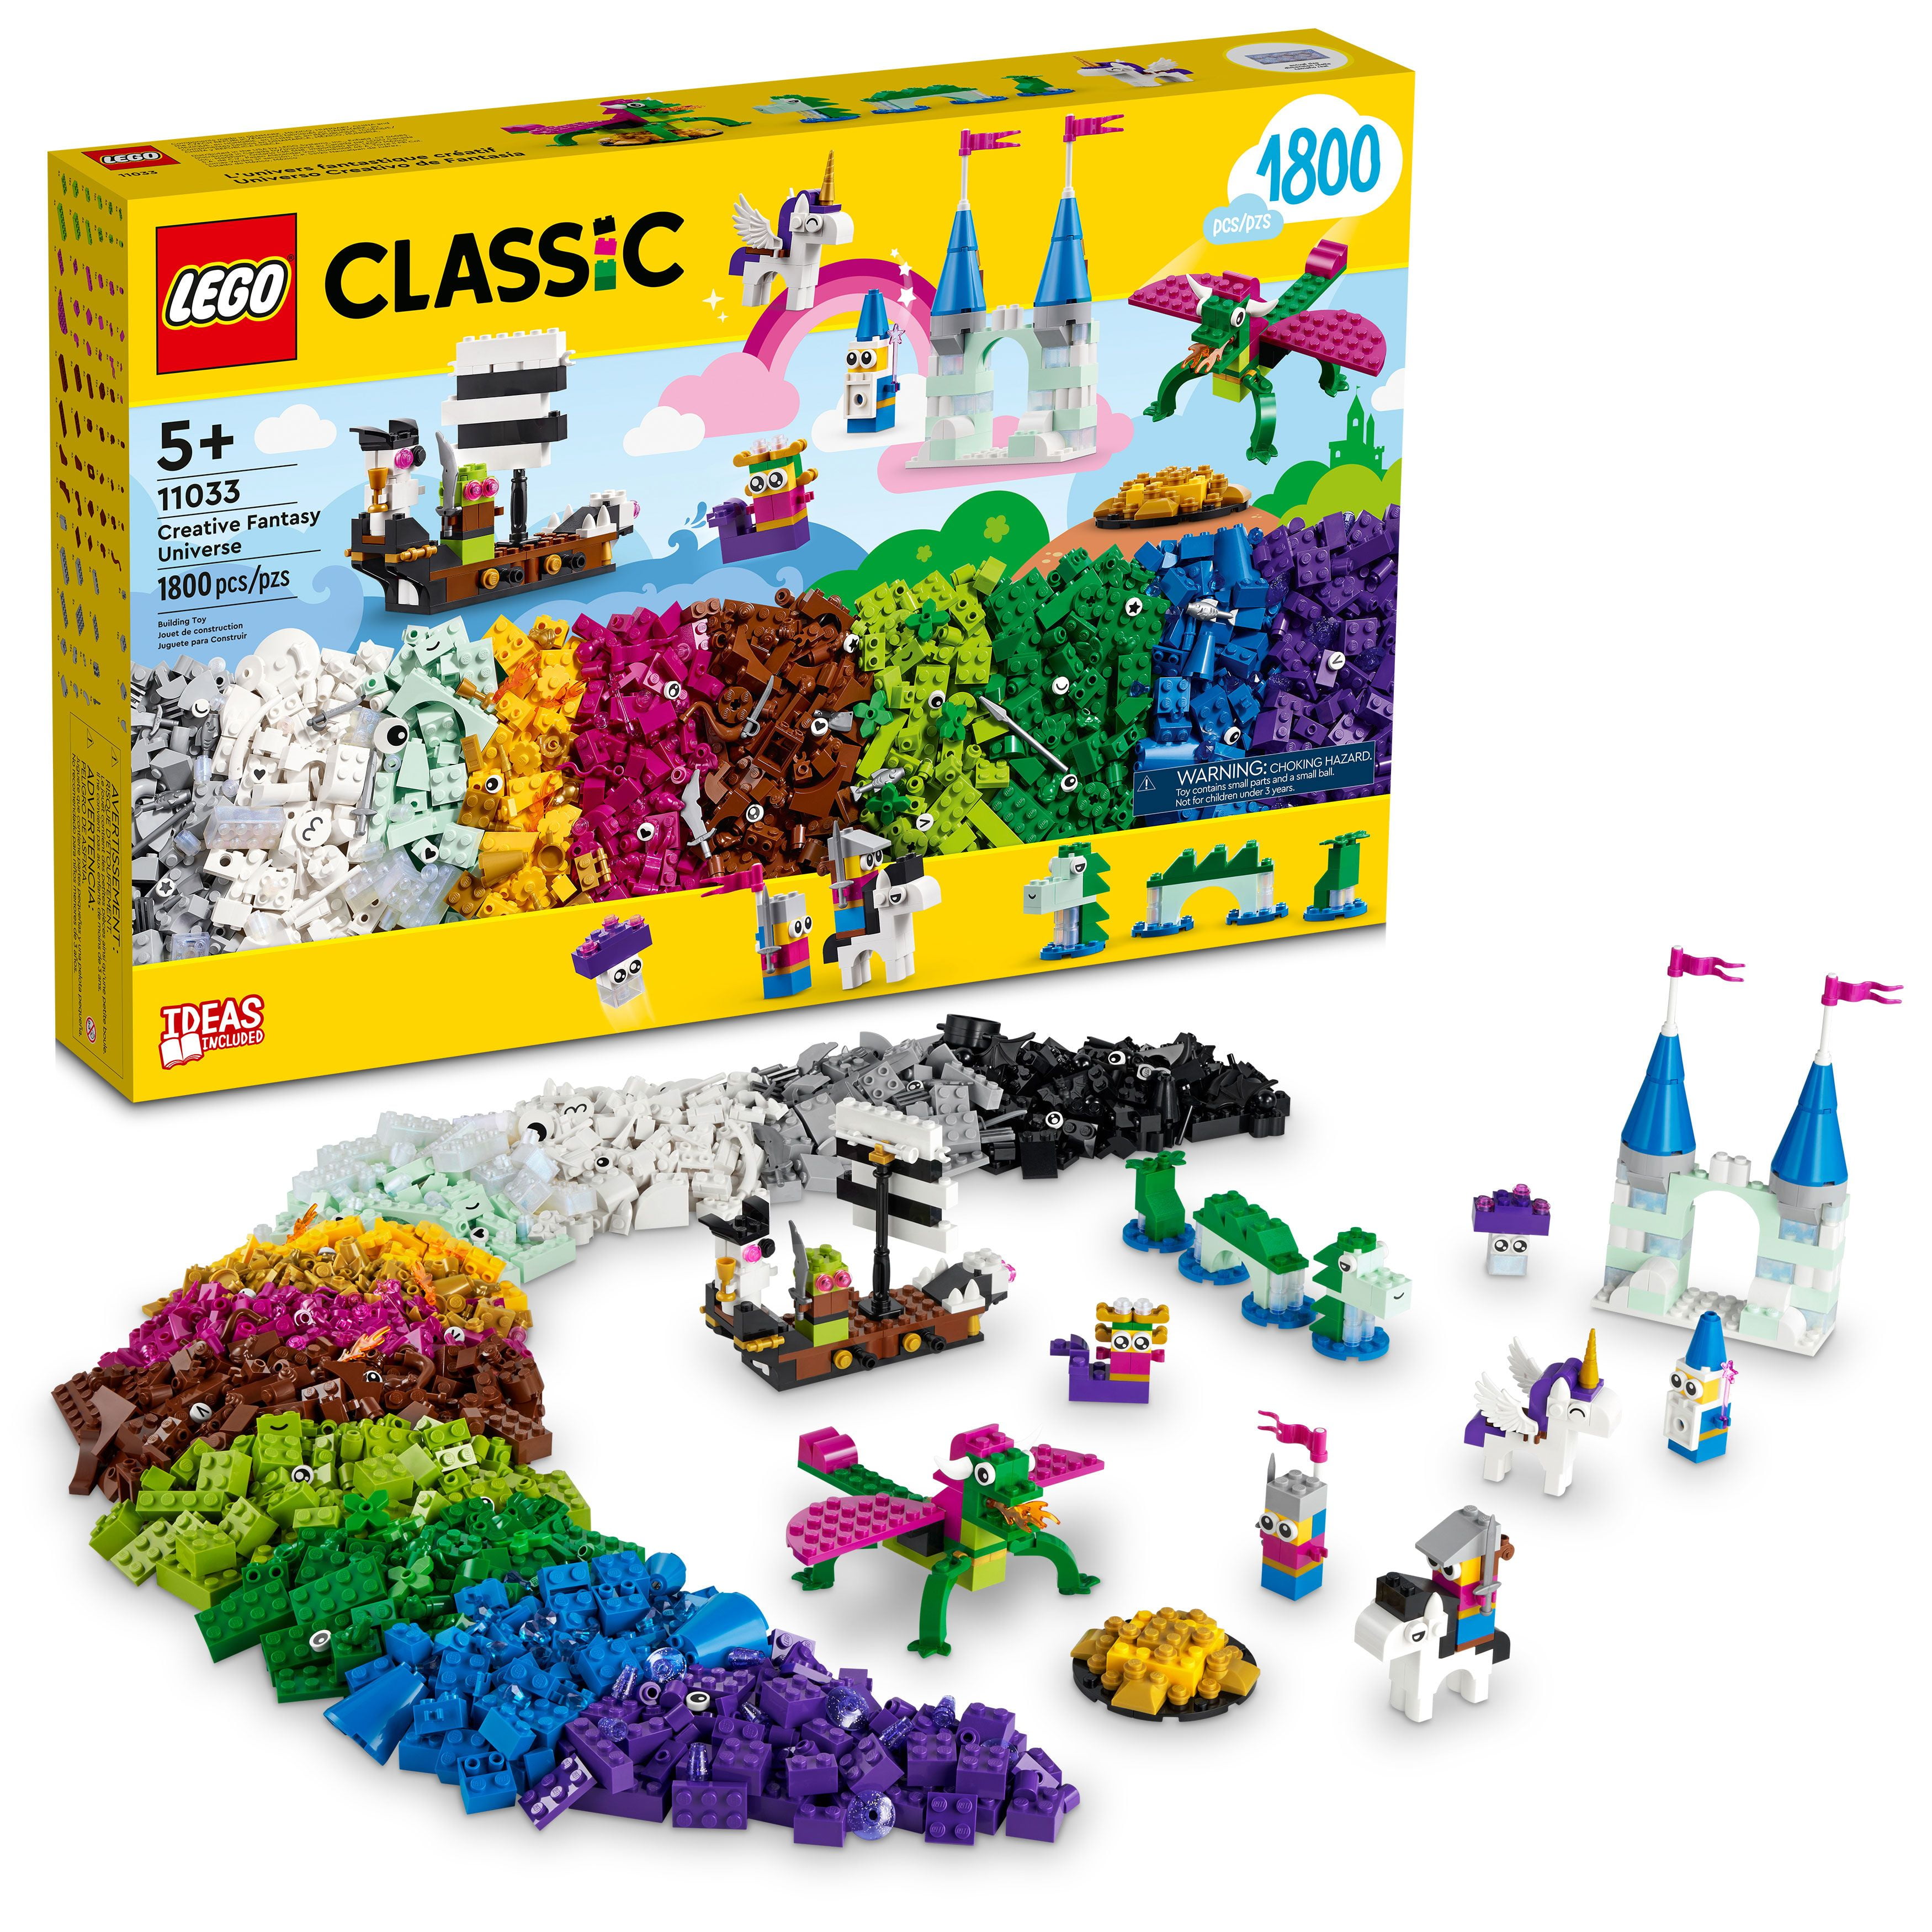 eftertiden Psykiatri Burma LEGO Classic Creative Fantasy Universe Set 11033, Building Adventure for  Imaginative Play with Unicorn Toy, Castle, Dragon and Pirate Ship Builds,  Gift Idea for Kids Ages 5 Plus - Walmart.com